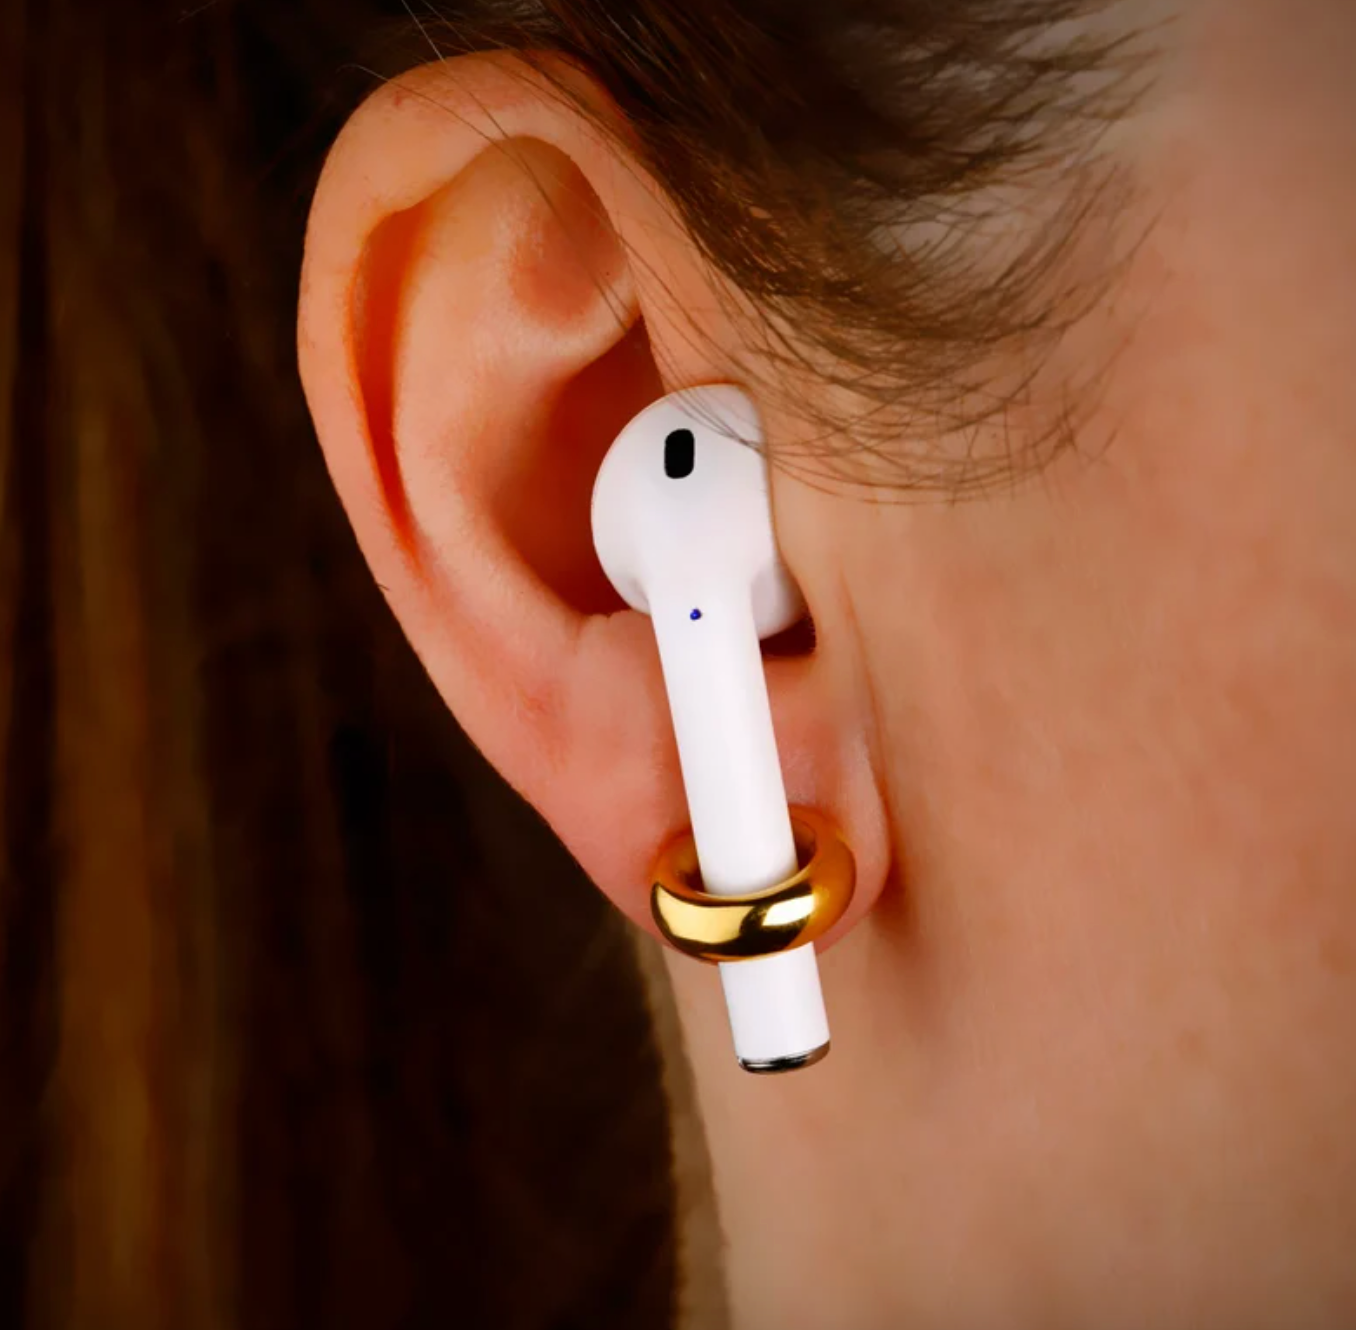 person wearing gold earring that is holding airpod in ear